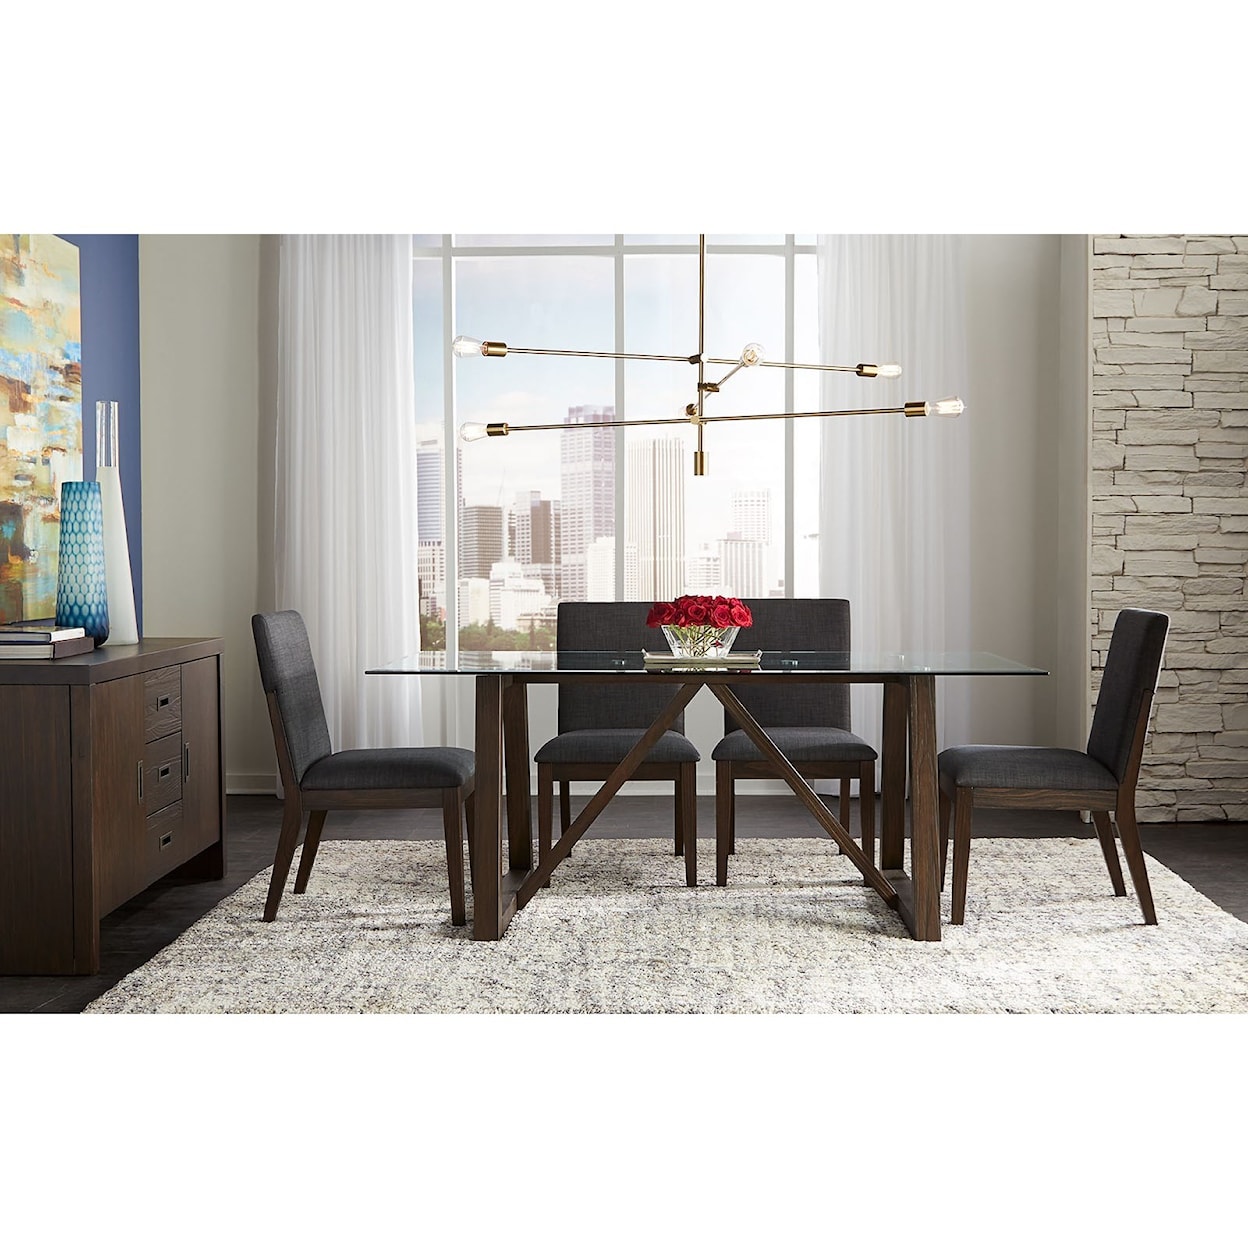 AAmerica Palm Canyon 5-Piece Table Set